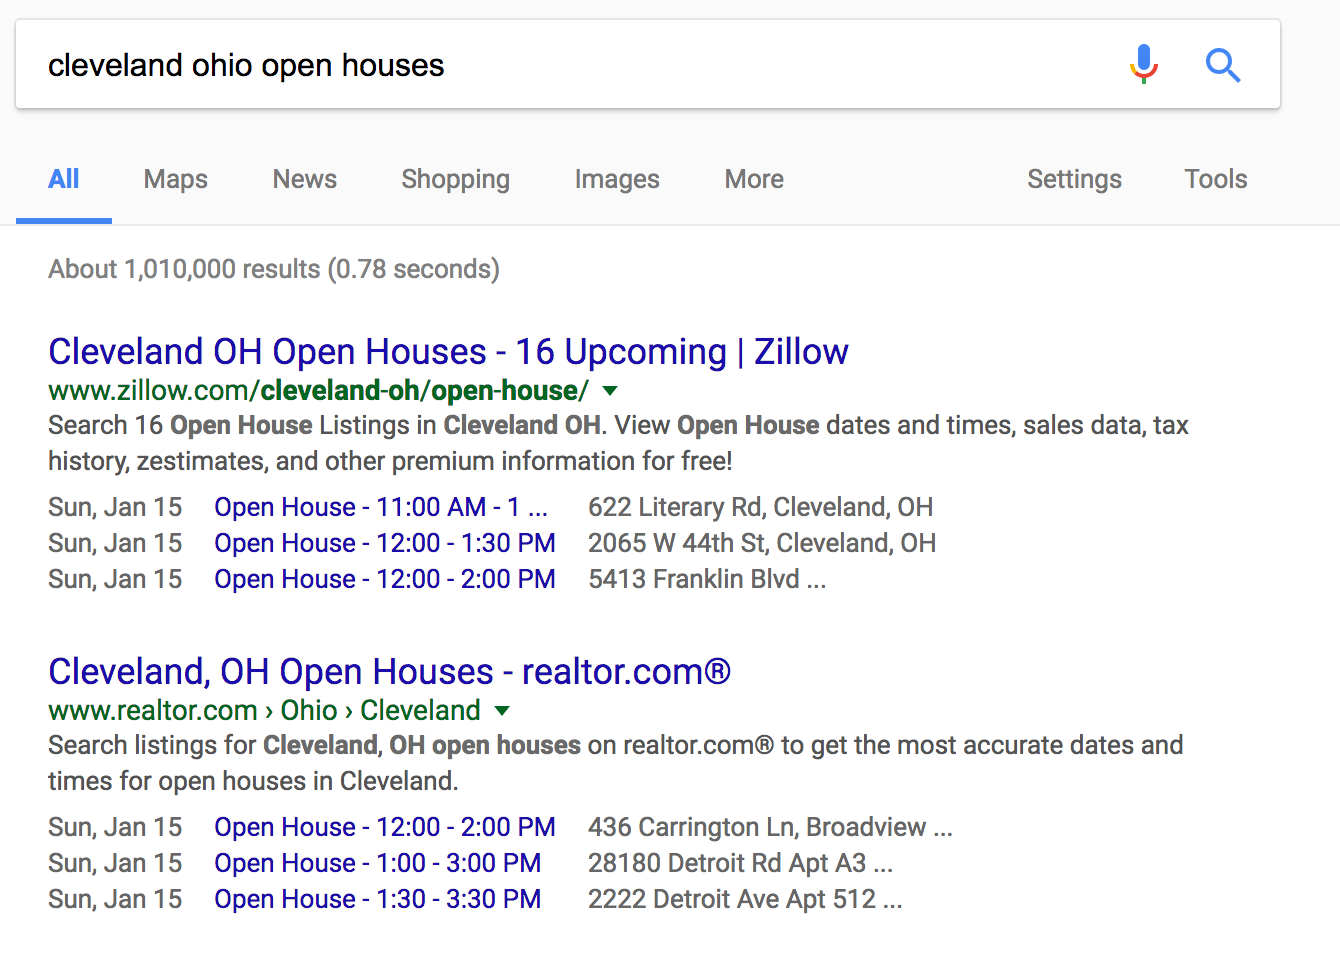 Open house information in search results